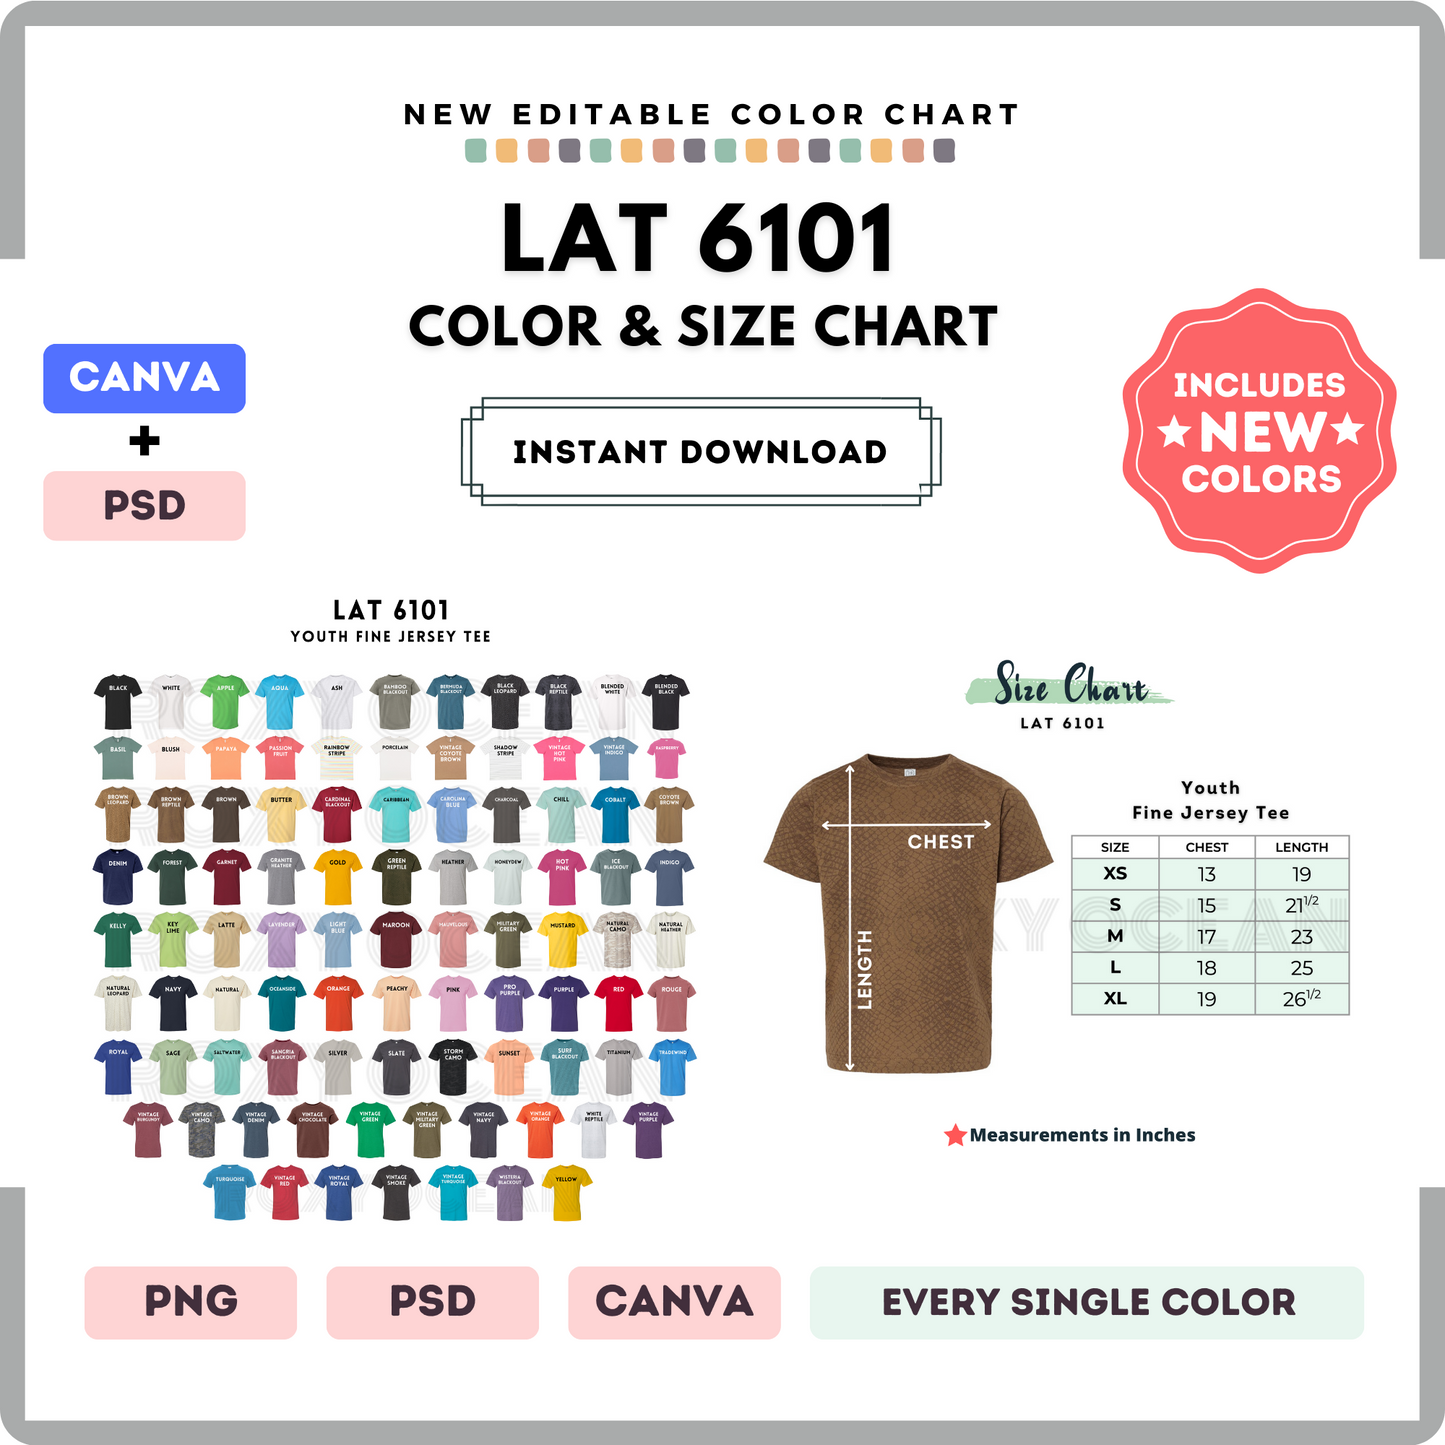 LAT 6101 Color and Size Chart